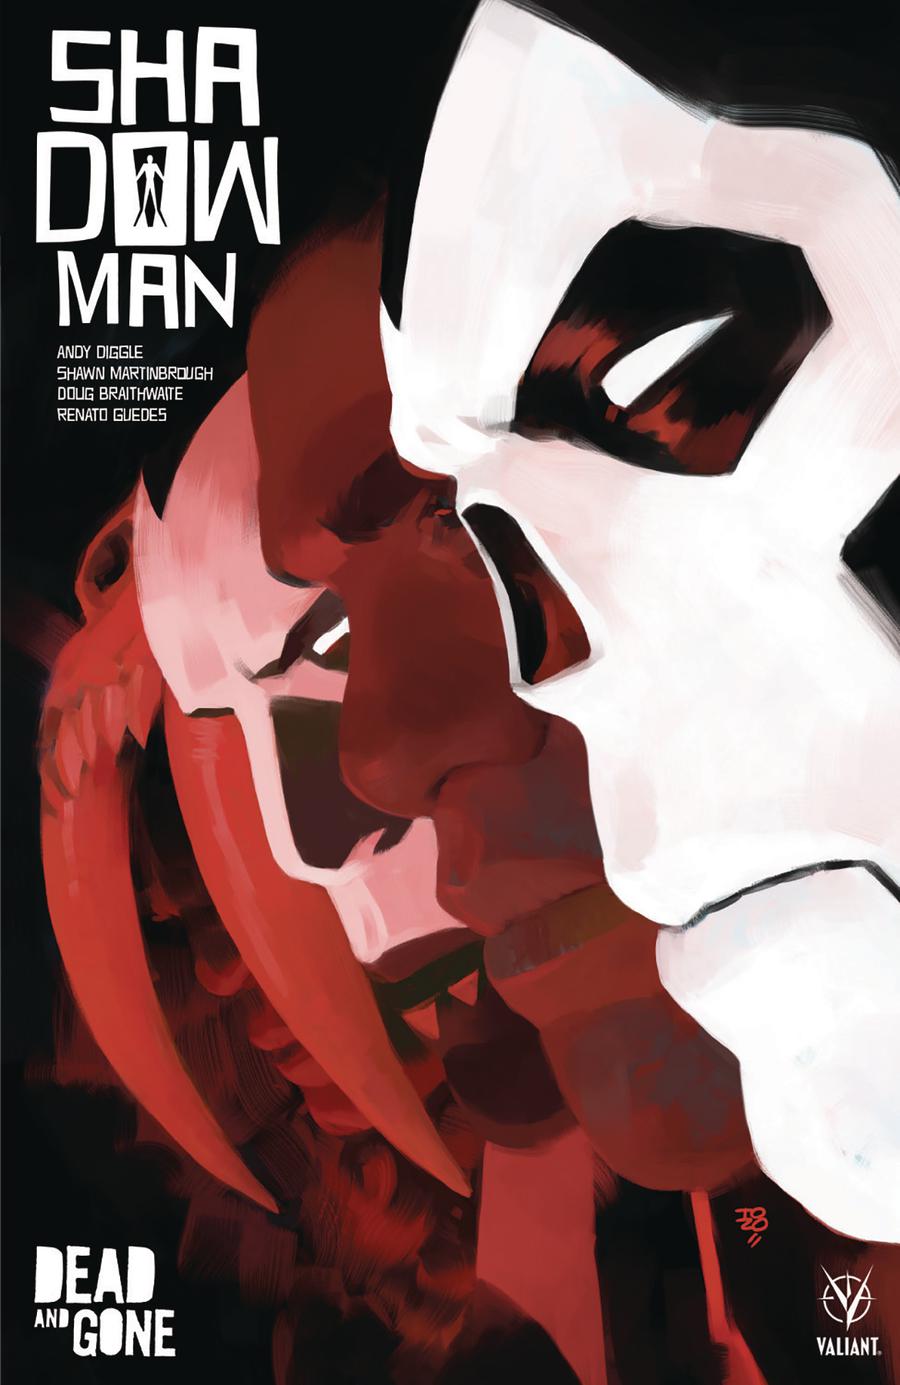 Shadowman (2018) Vol 2 Dead And Gone TP